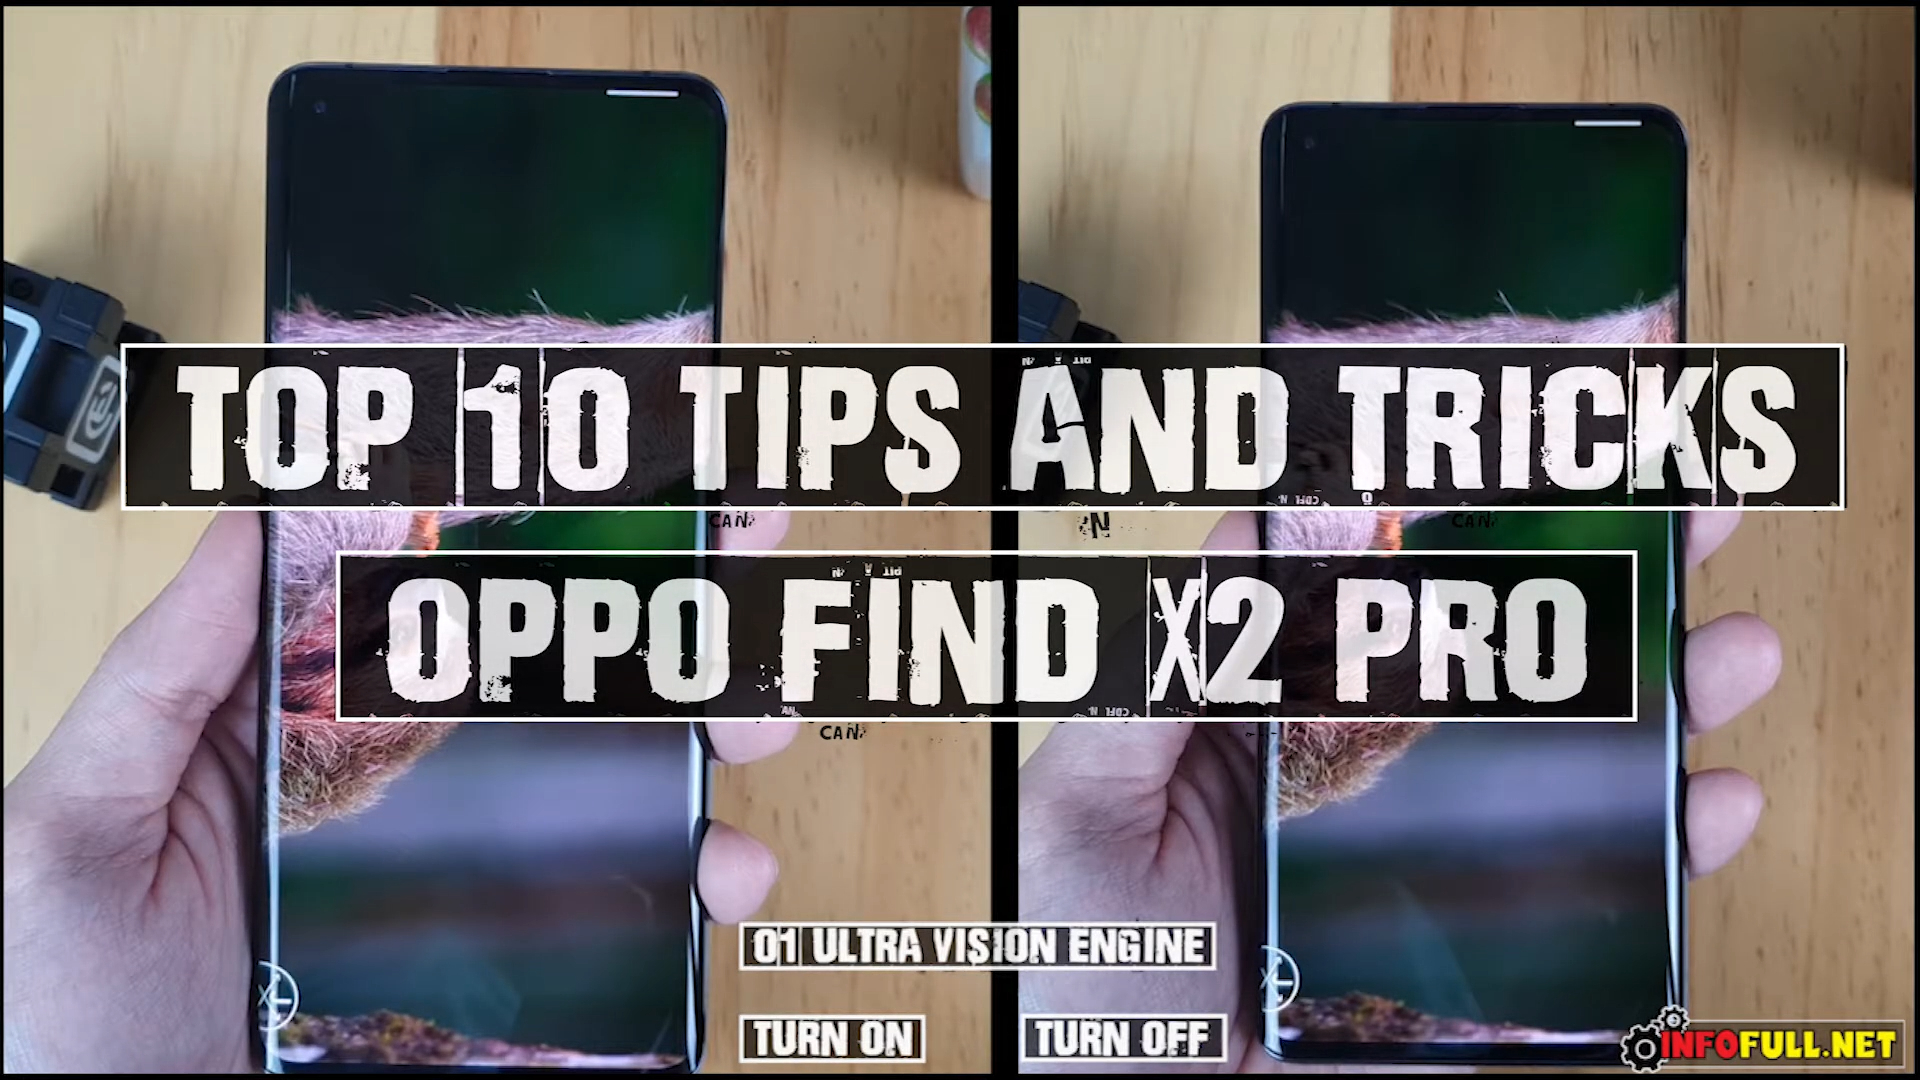 Top 10 Tips and Tricks Oppo Find X2 Pro you need know - GSM FULL INFO